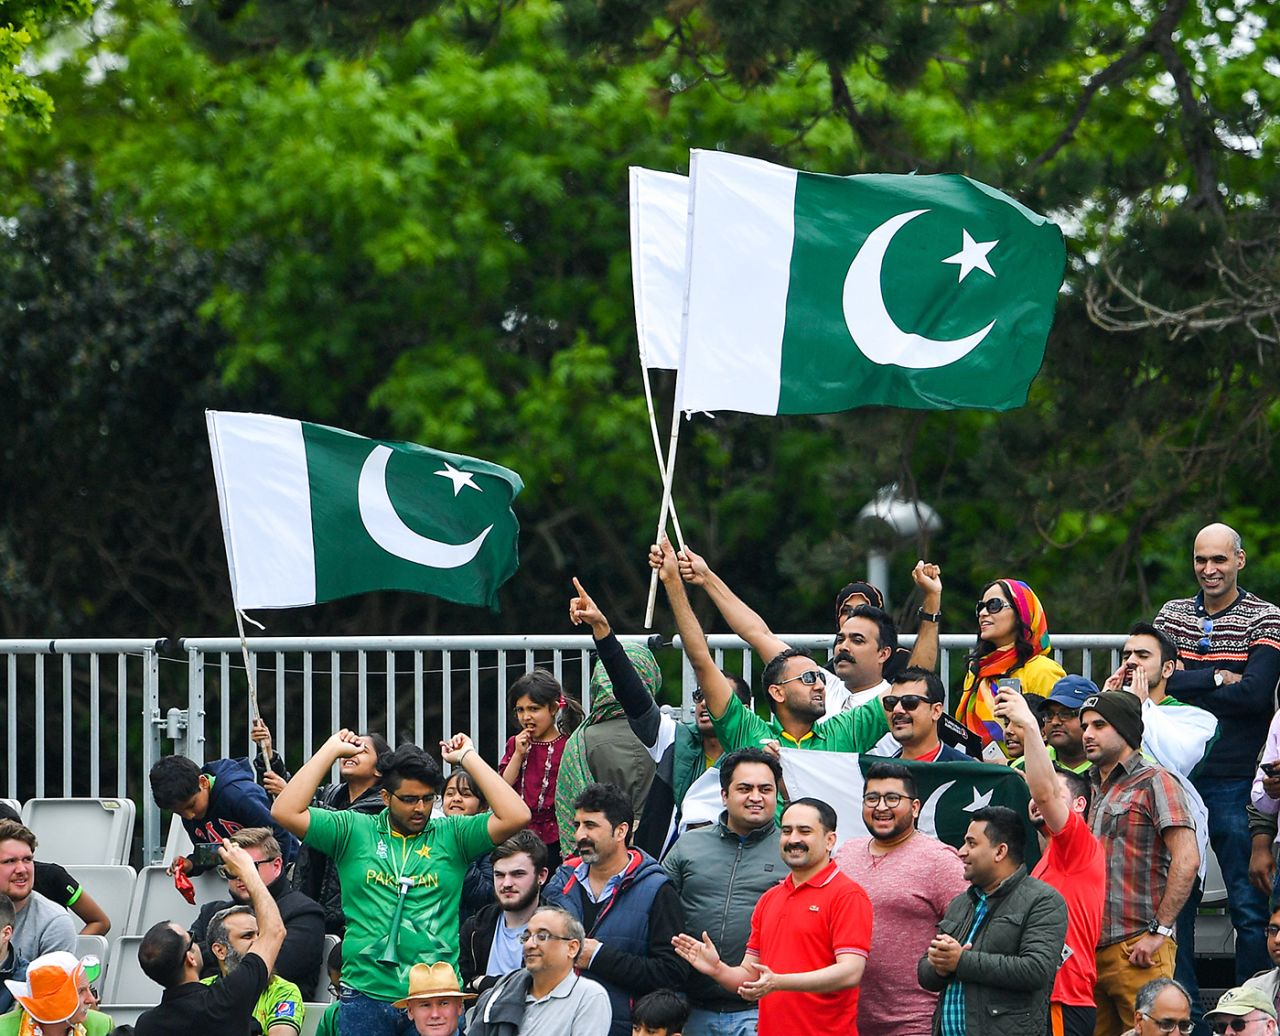 Pakistan fans celebrate during their Test in Ireland in 2018, Ireland v Pakistan, Only Test, Malahide, 2nd day, May 12, 2018